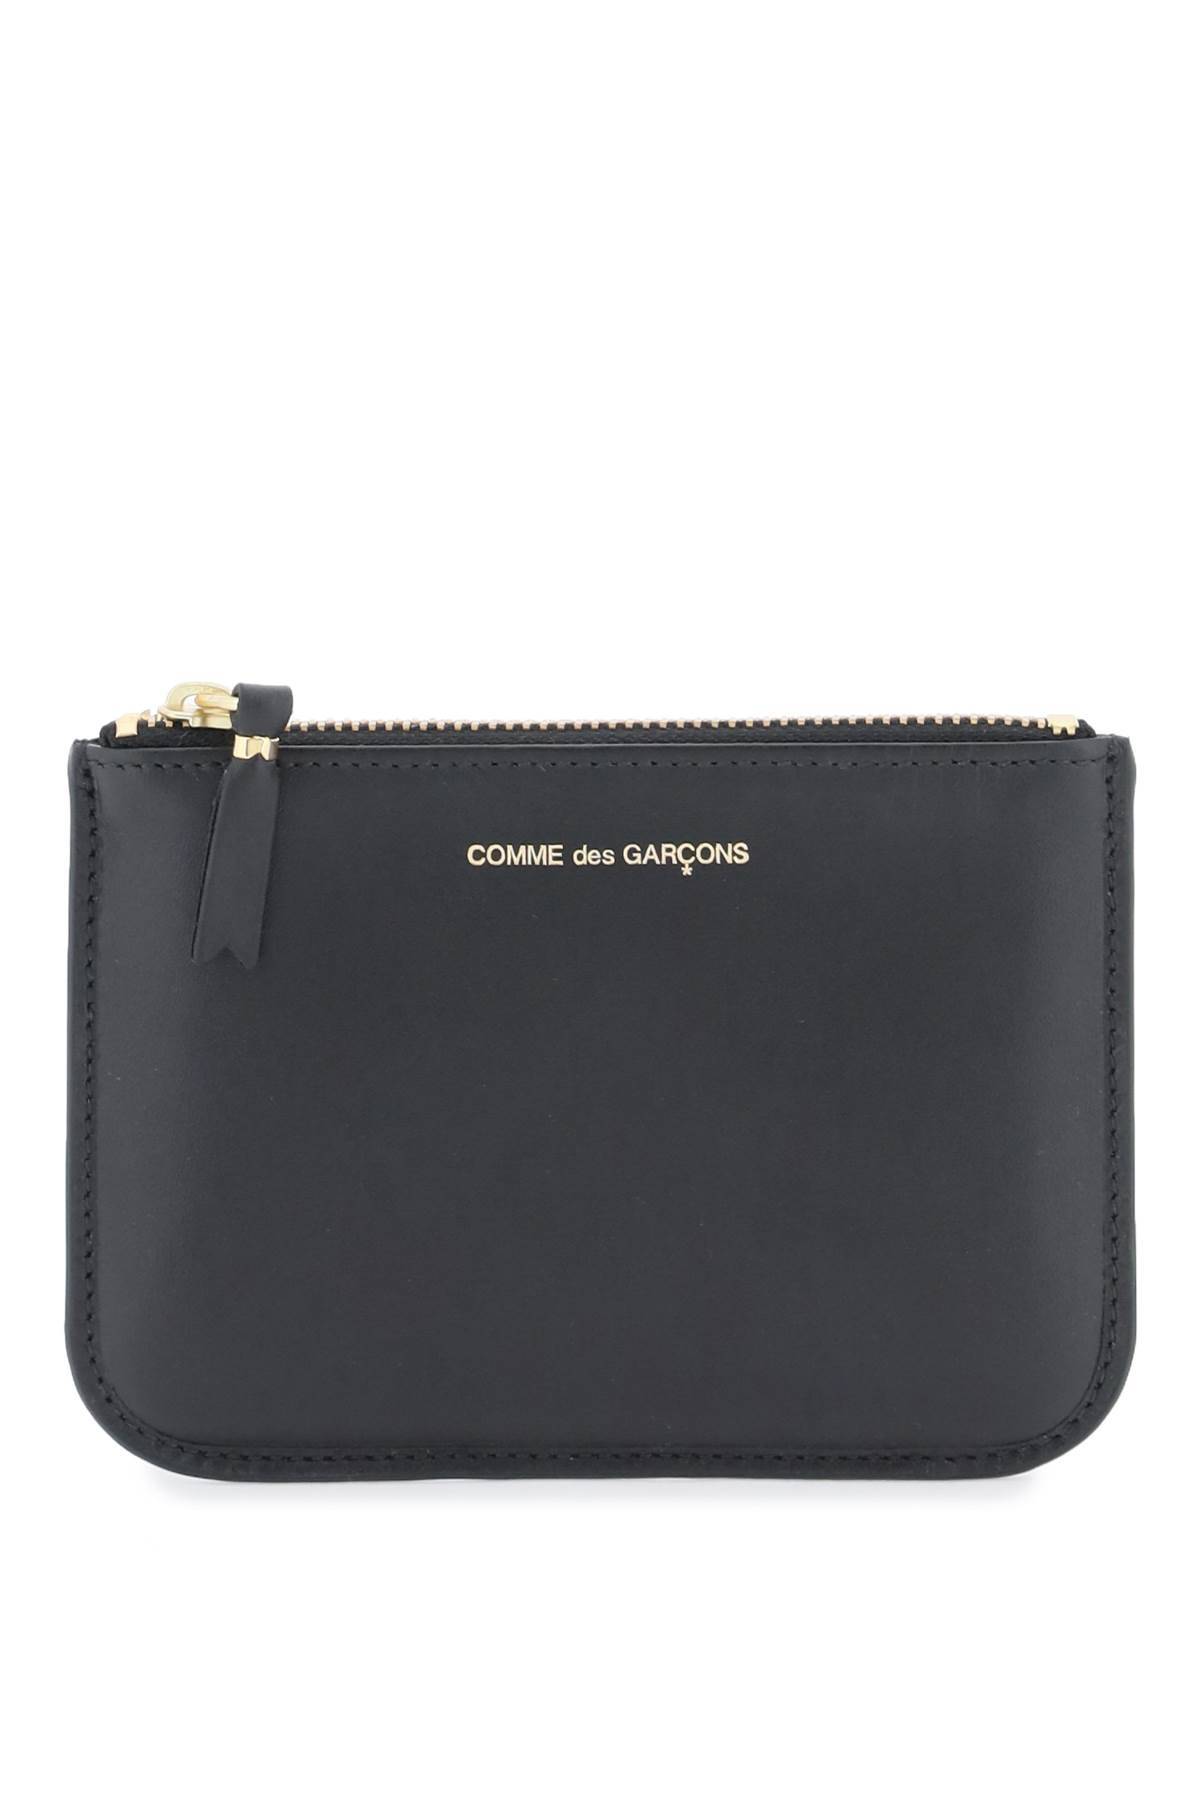 COMME DES GARCONS WALLET COMME DES GARCONS WALLET leather mini pouch